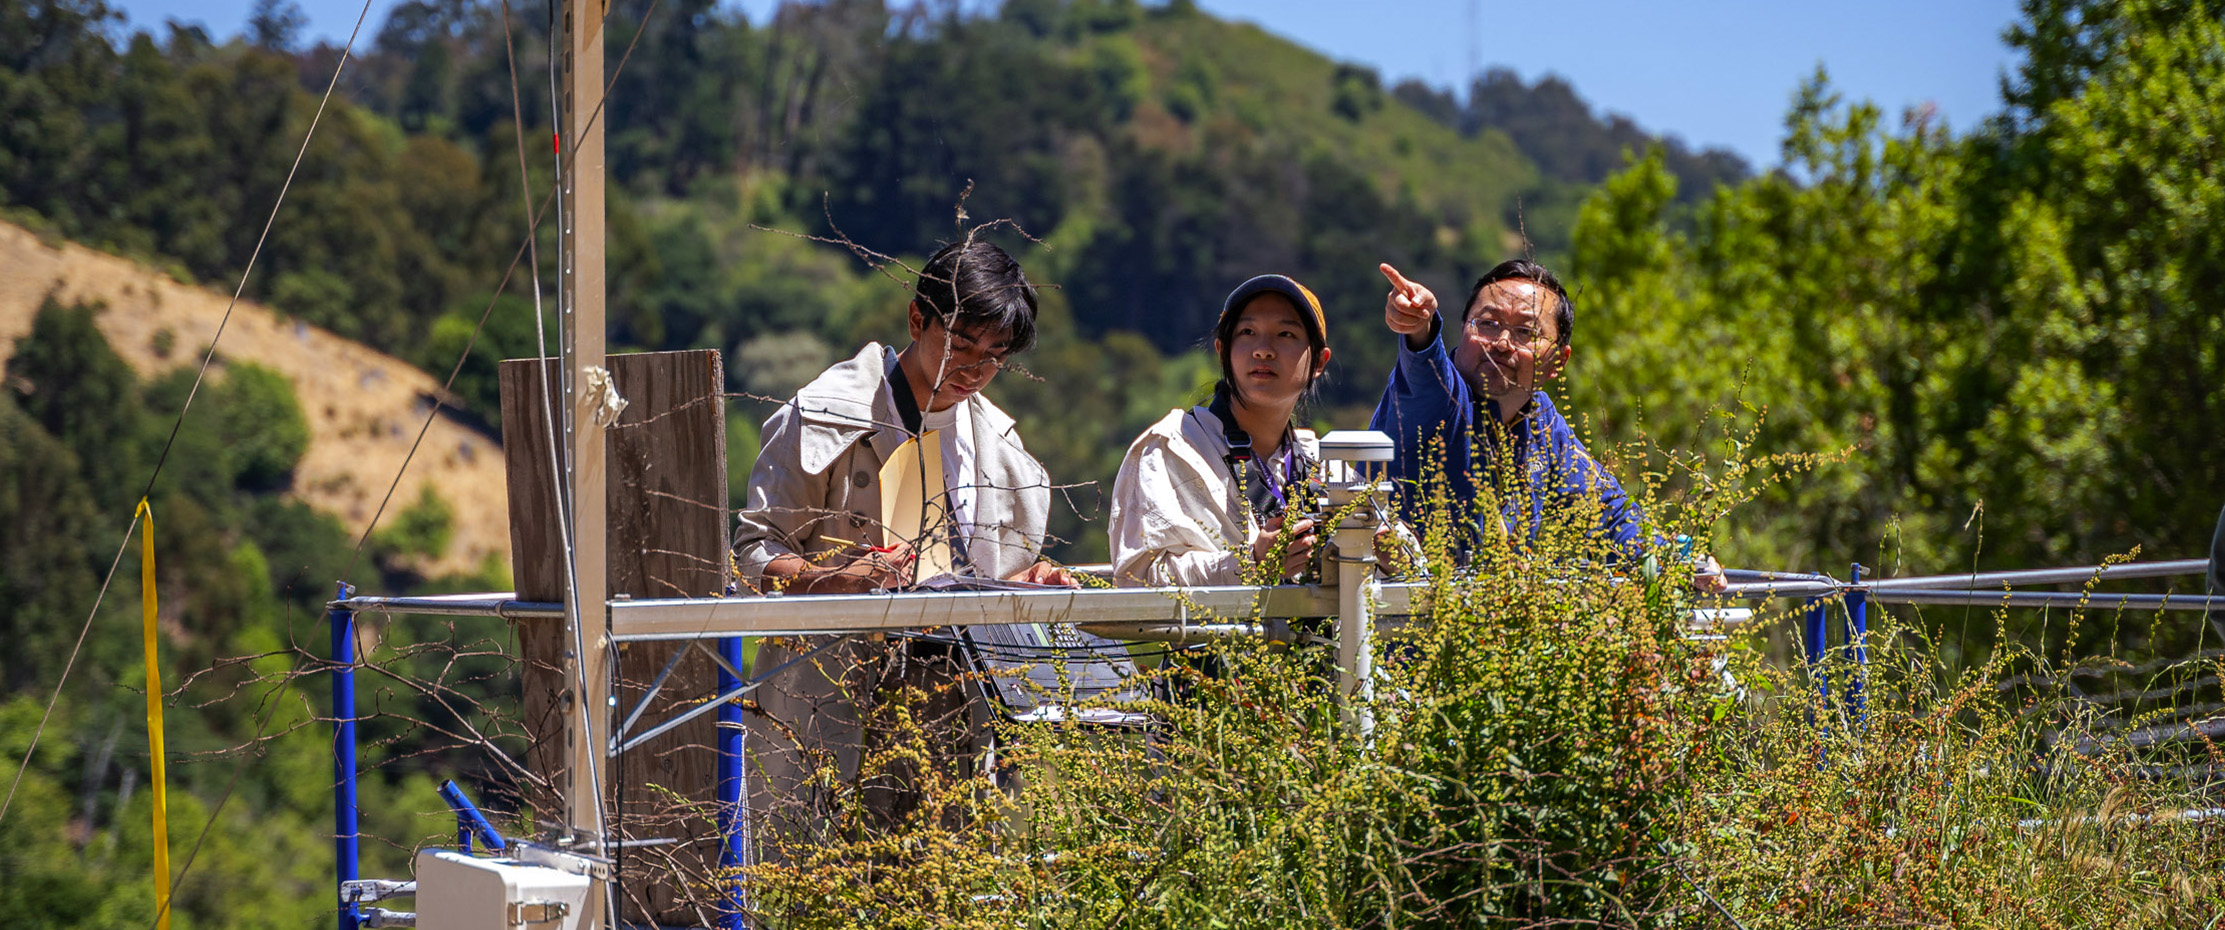 A scientists points at a camera overlooking a test bed full of plants, while two students take notes